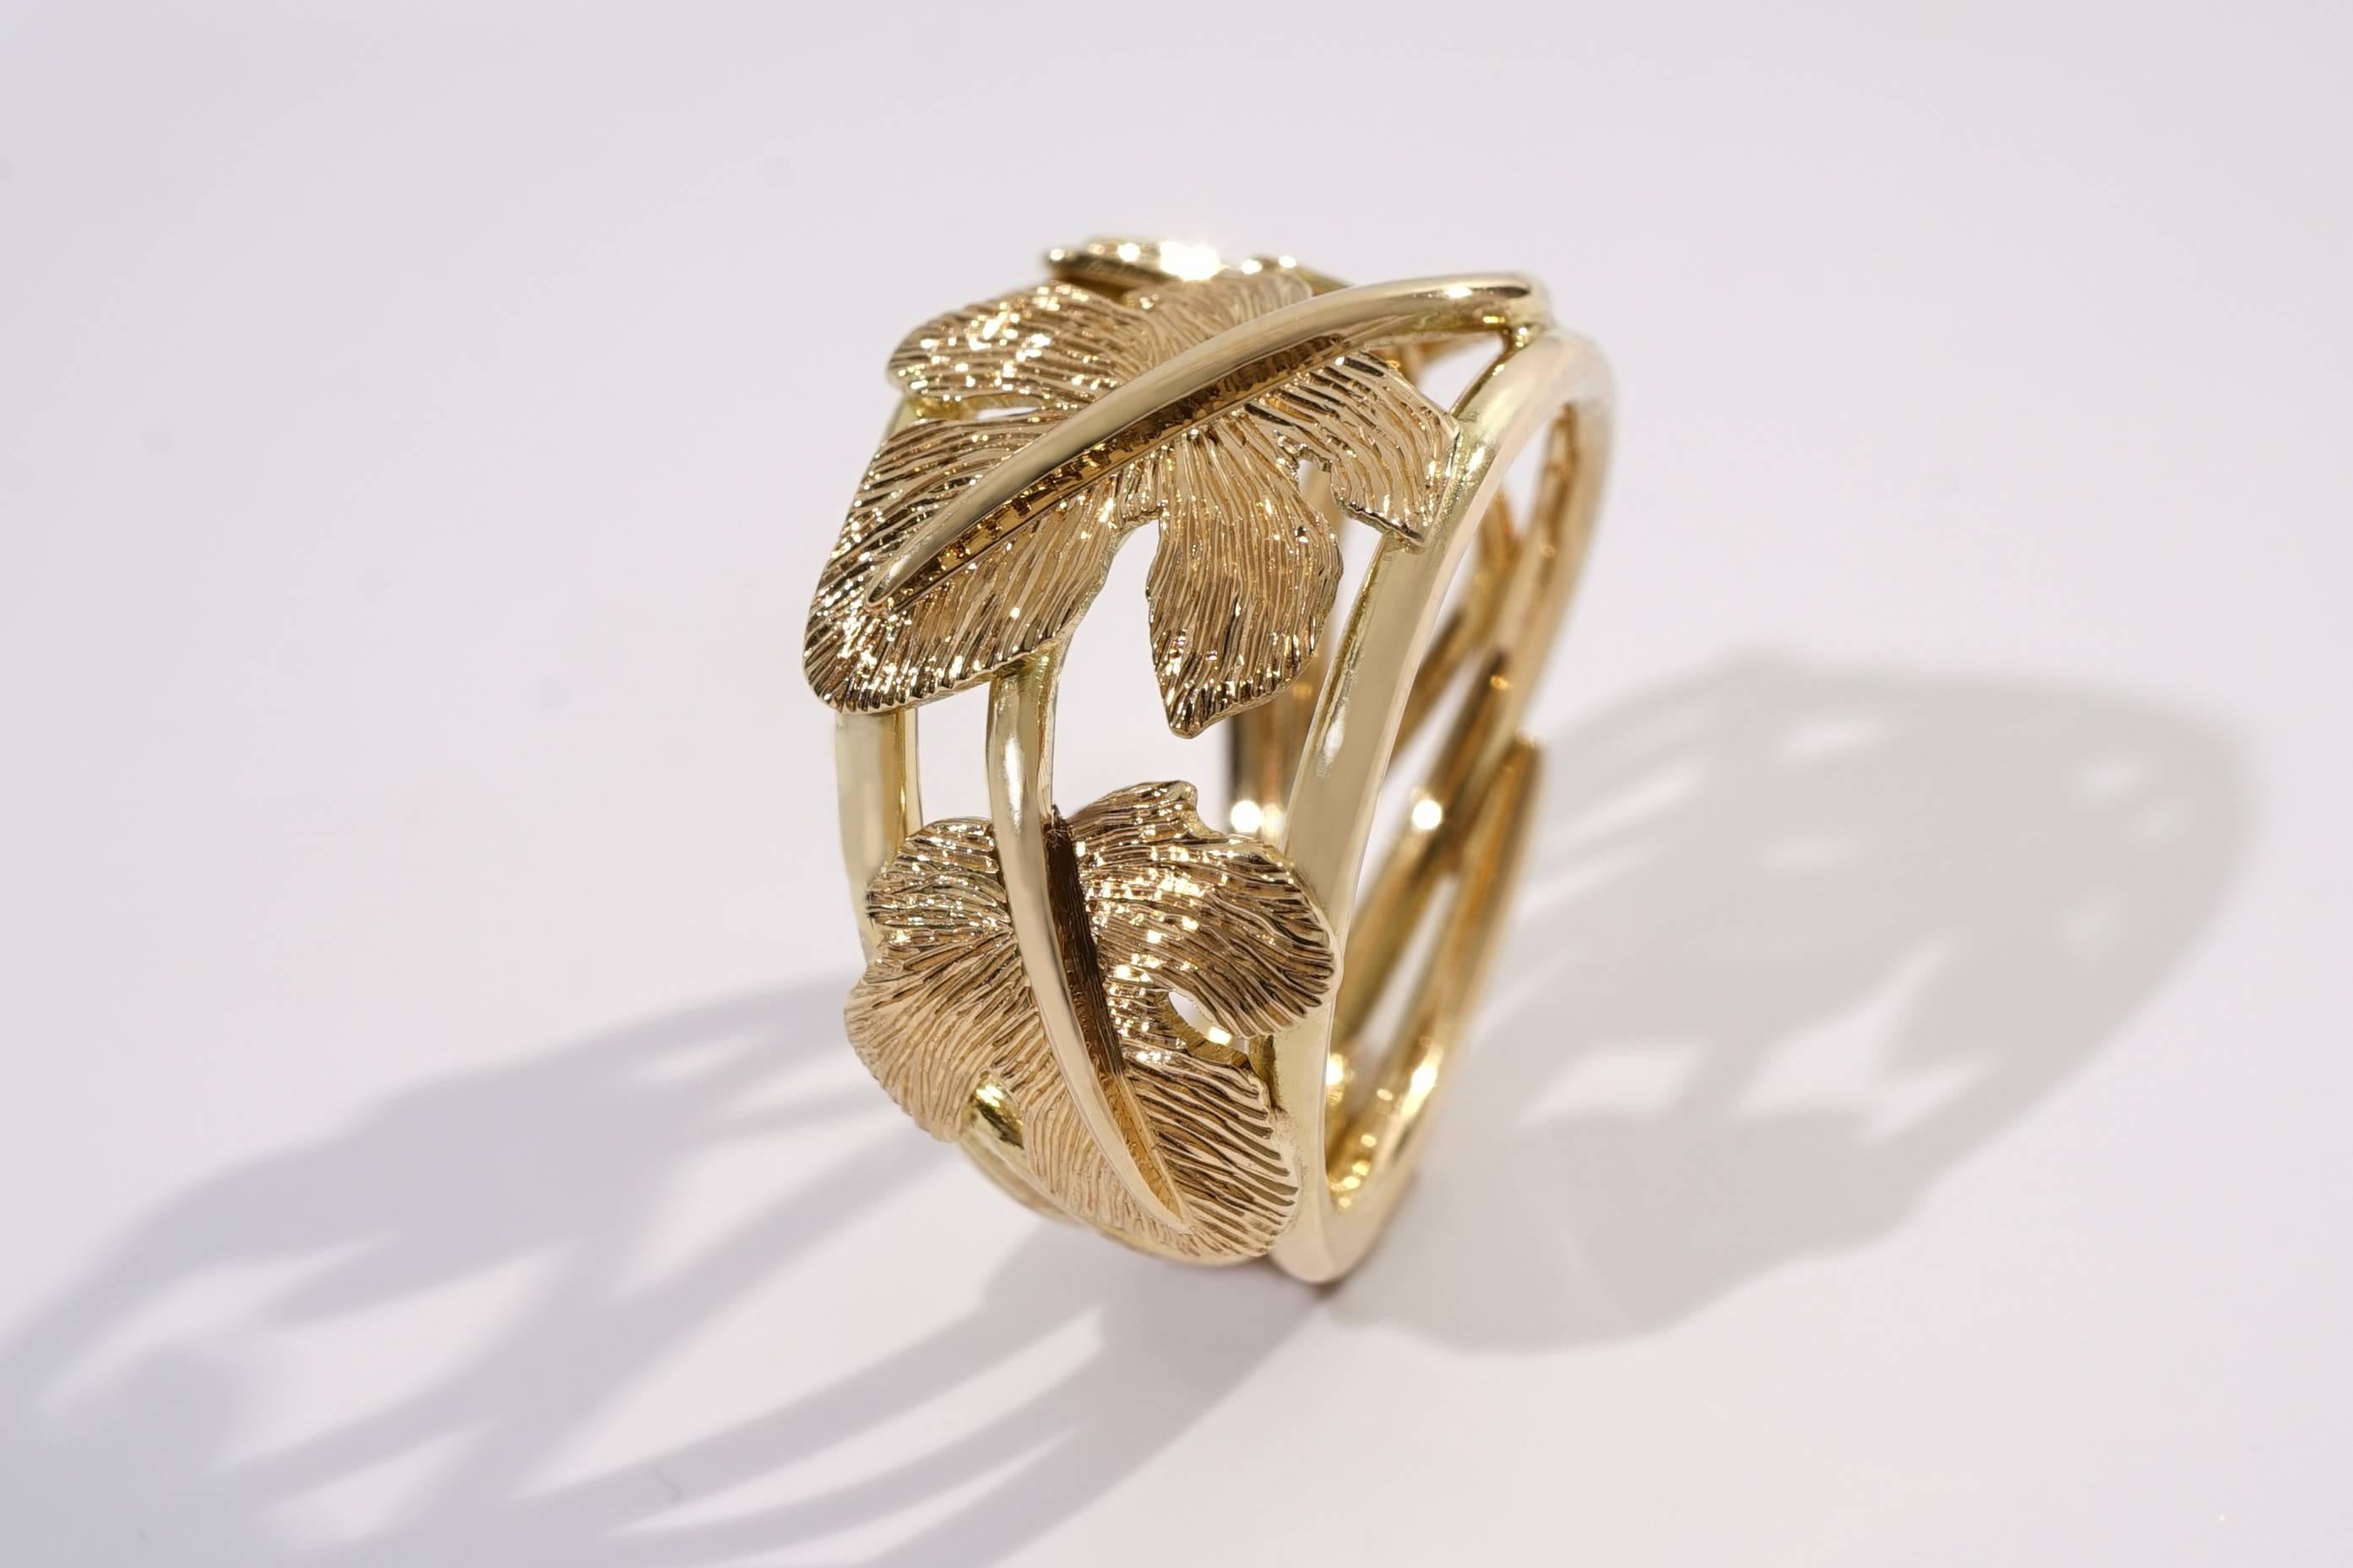 Coralie Van Caloen Yellow Gold 18 Carat Pinky Band Ring With Hand Engraved Fig Leaves is entirely hand made and forged in Belgium by experts goldsmiths therefore it is a very unique piece. Inspired by Mediterranean summer atmospheres the pinky ring